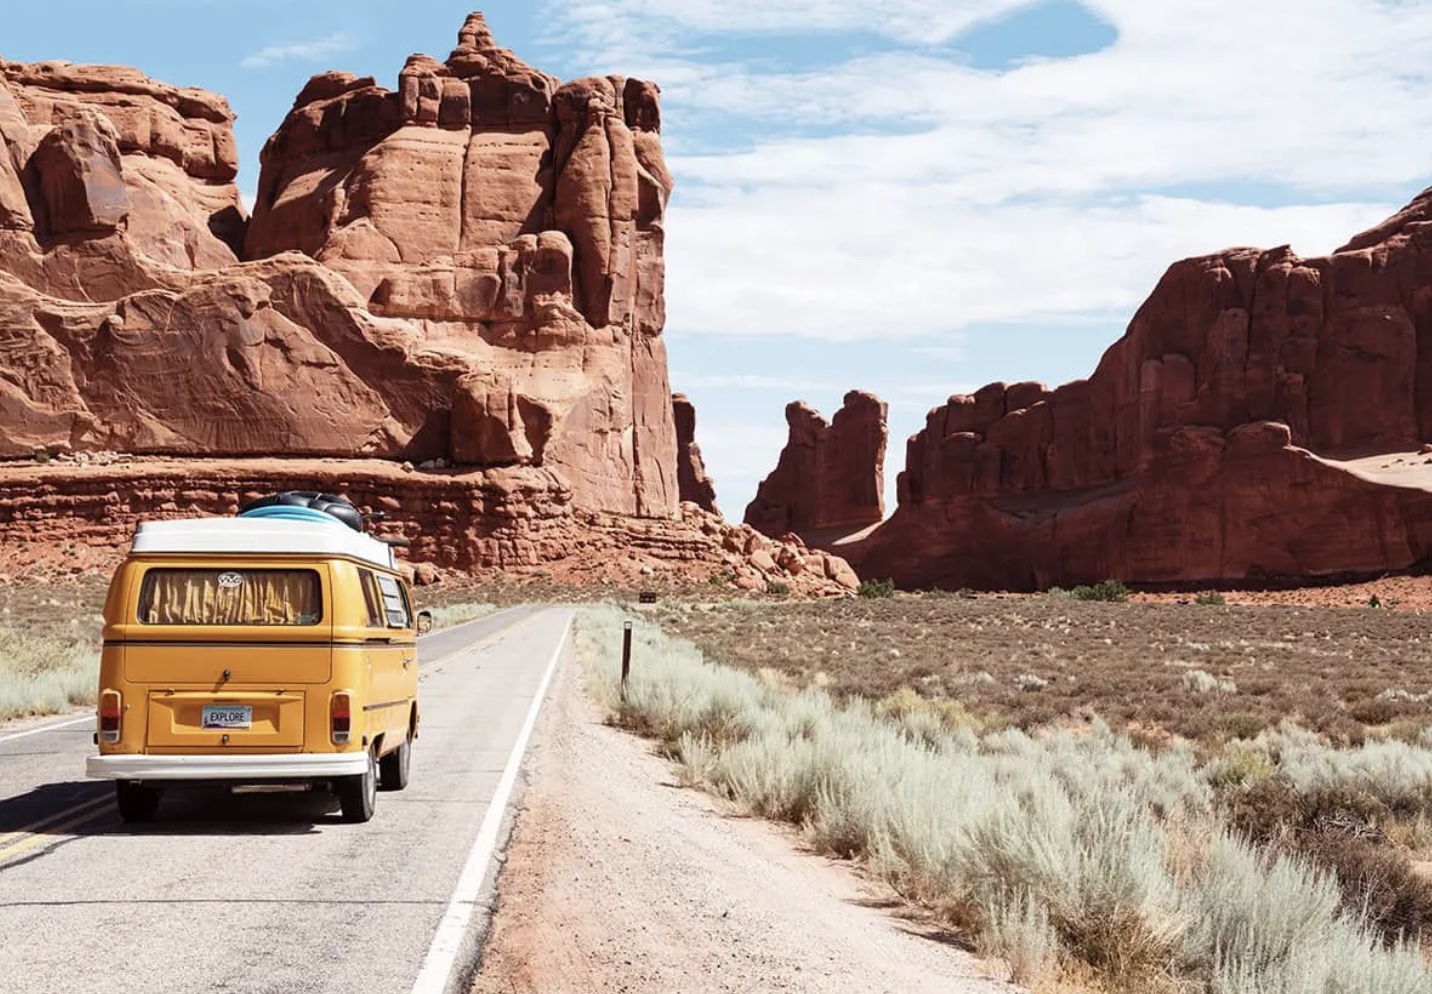 Road trip with kids? 8 ideas to make it easier